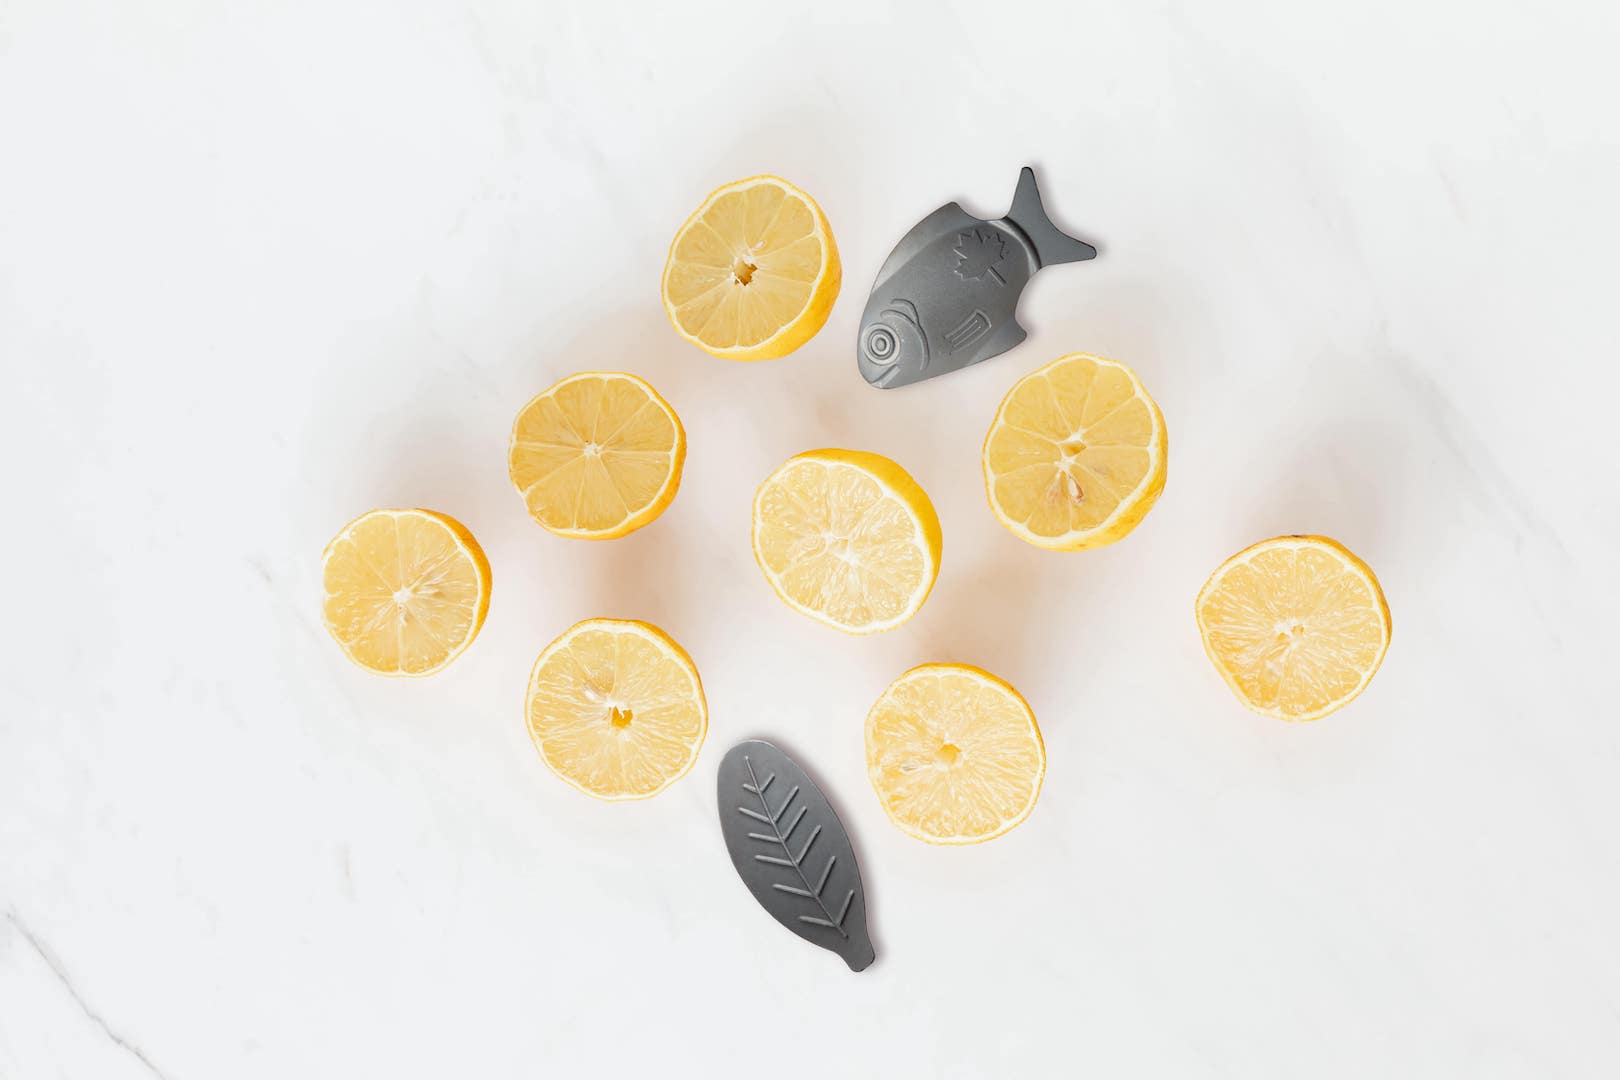 Lucky Iron Fish and Leaf on counter with lemon halves